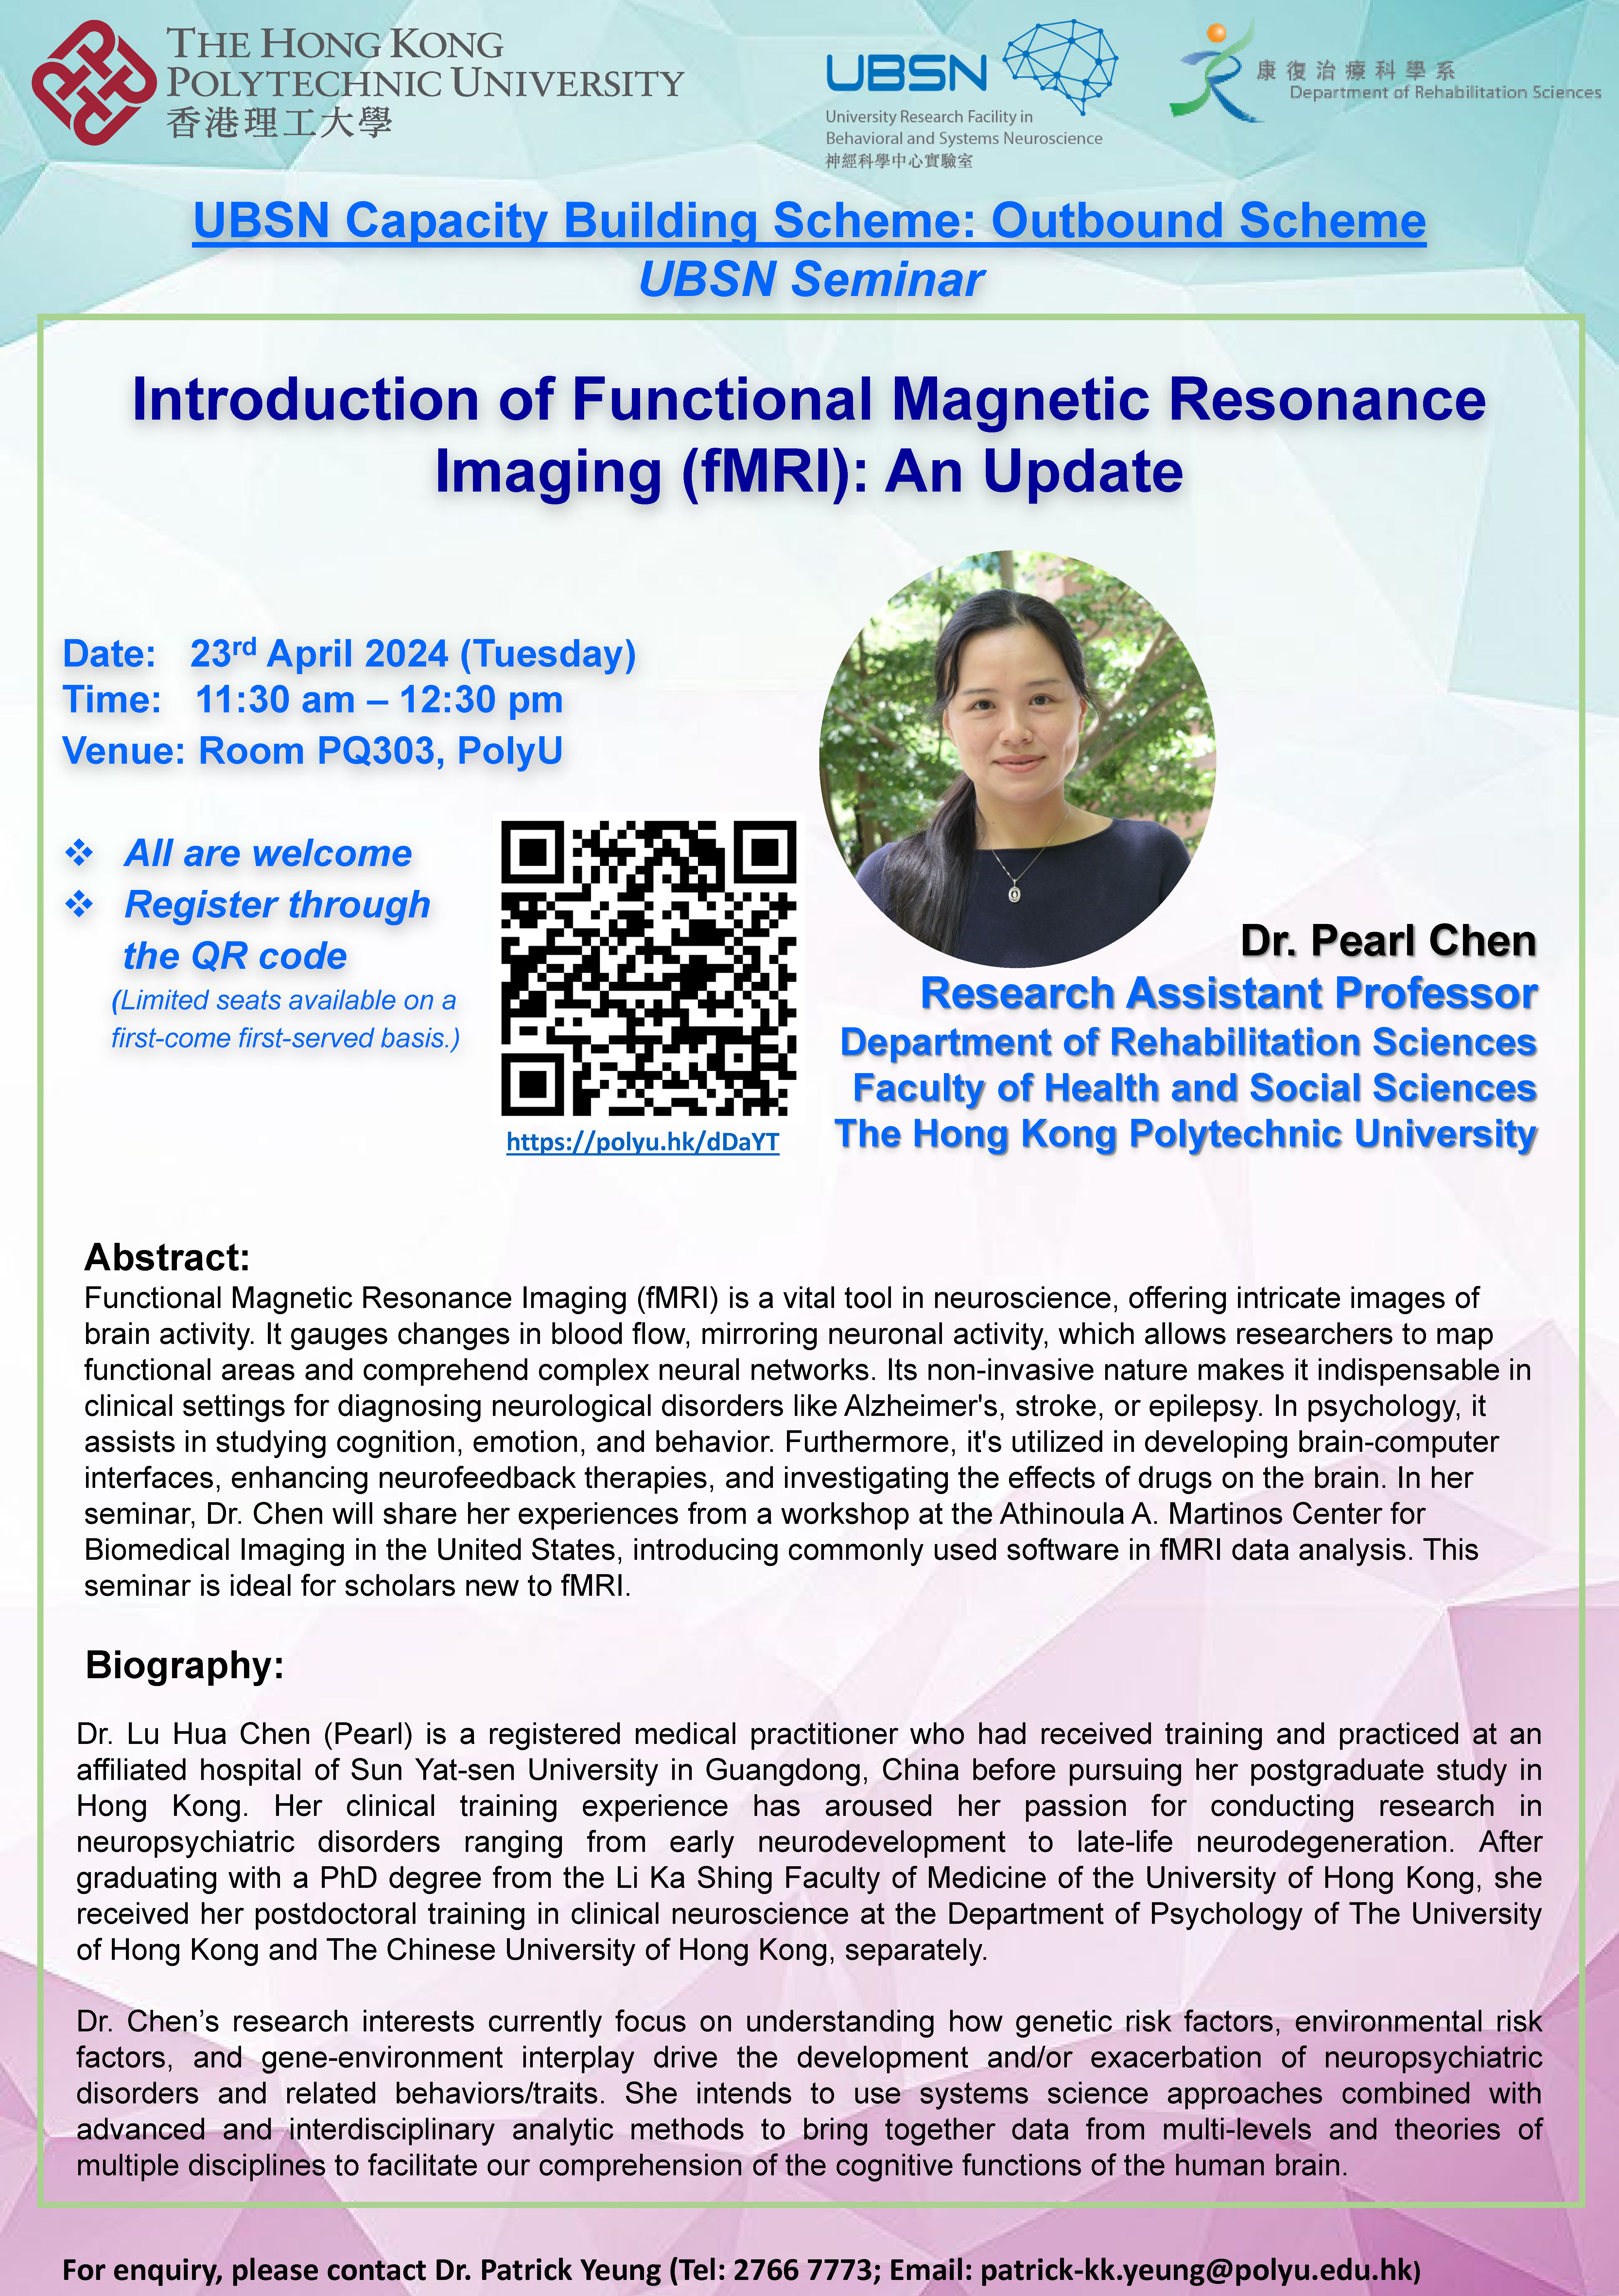 UBSN Seminar_Dr Pearl Chen_updated poster for MLM pq303